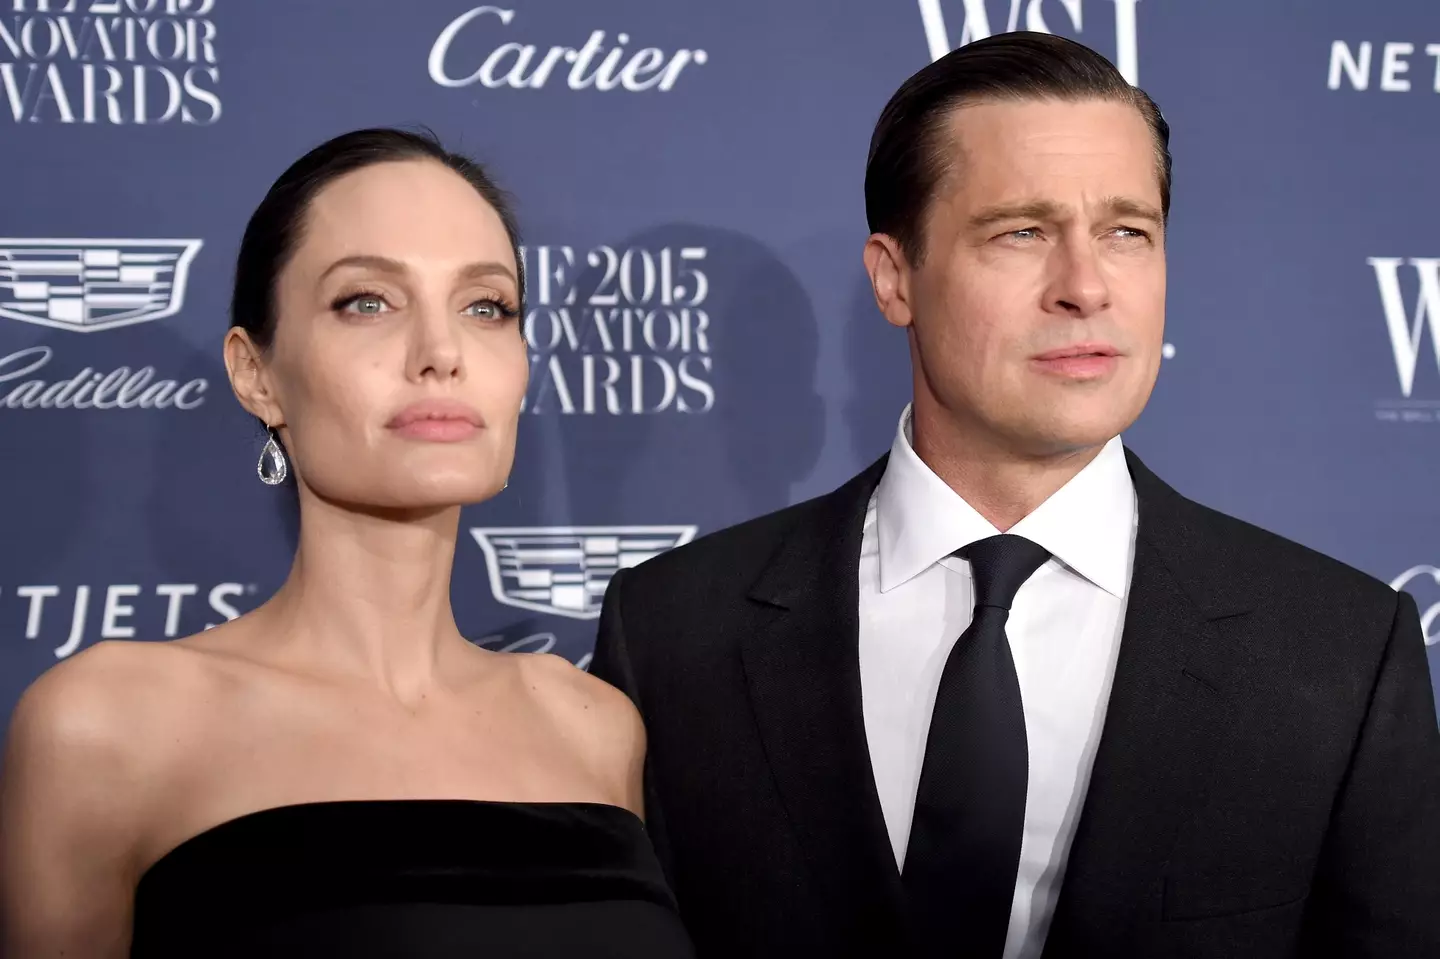 New court filings claim Pitt was abusive towards Jolie prior to the 2016 plane incident.